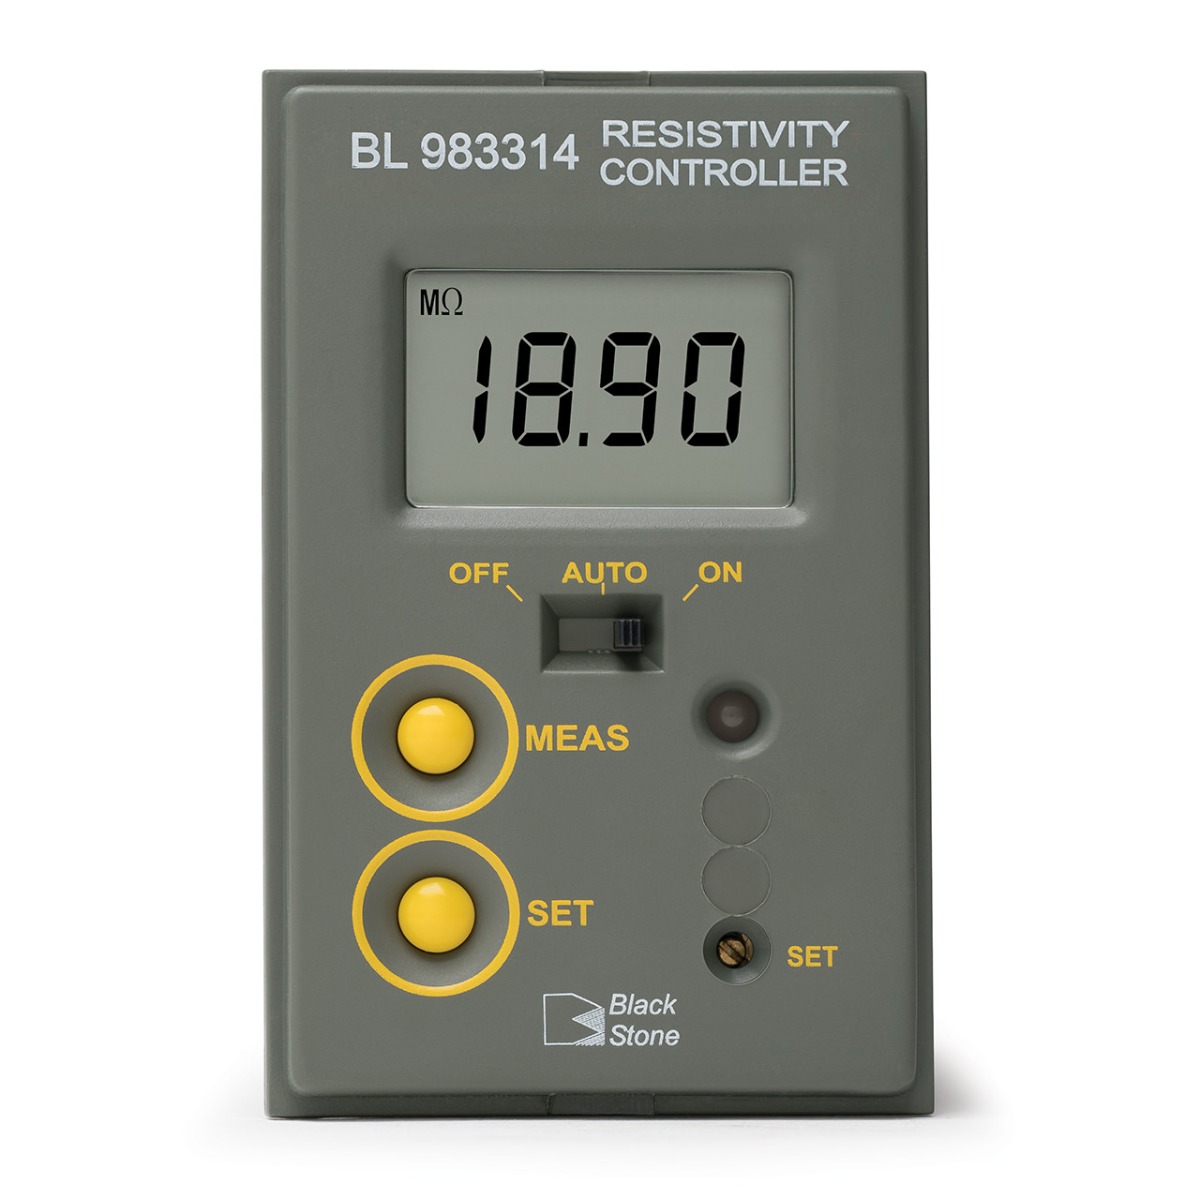 B water L983314 resistivity min controller for high purity